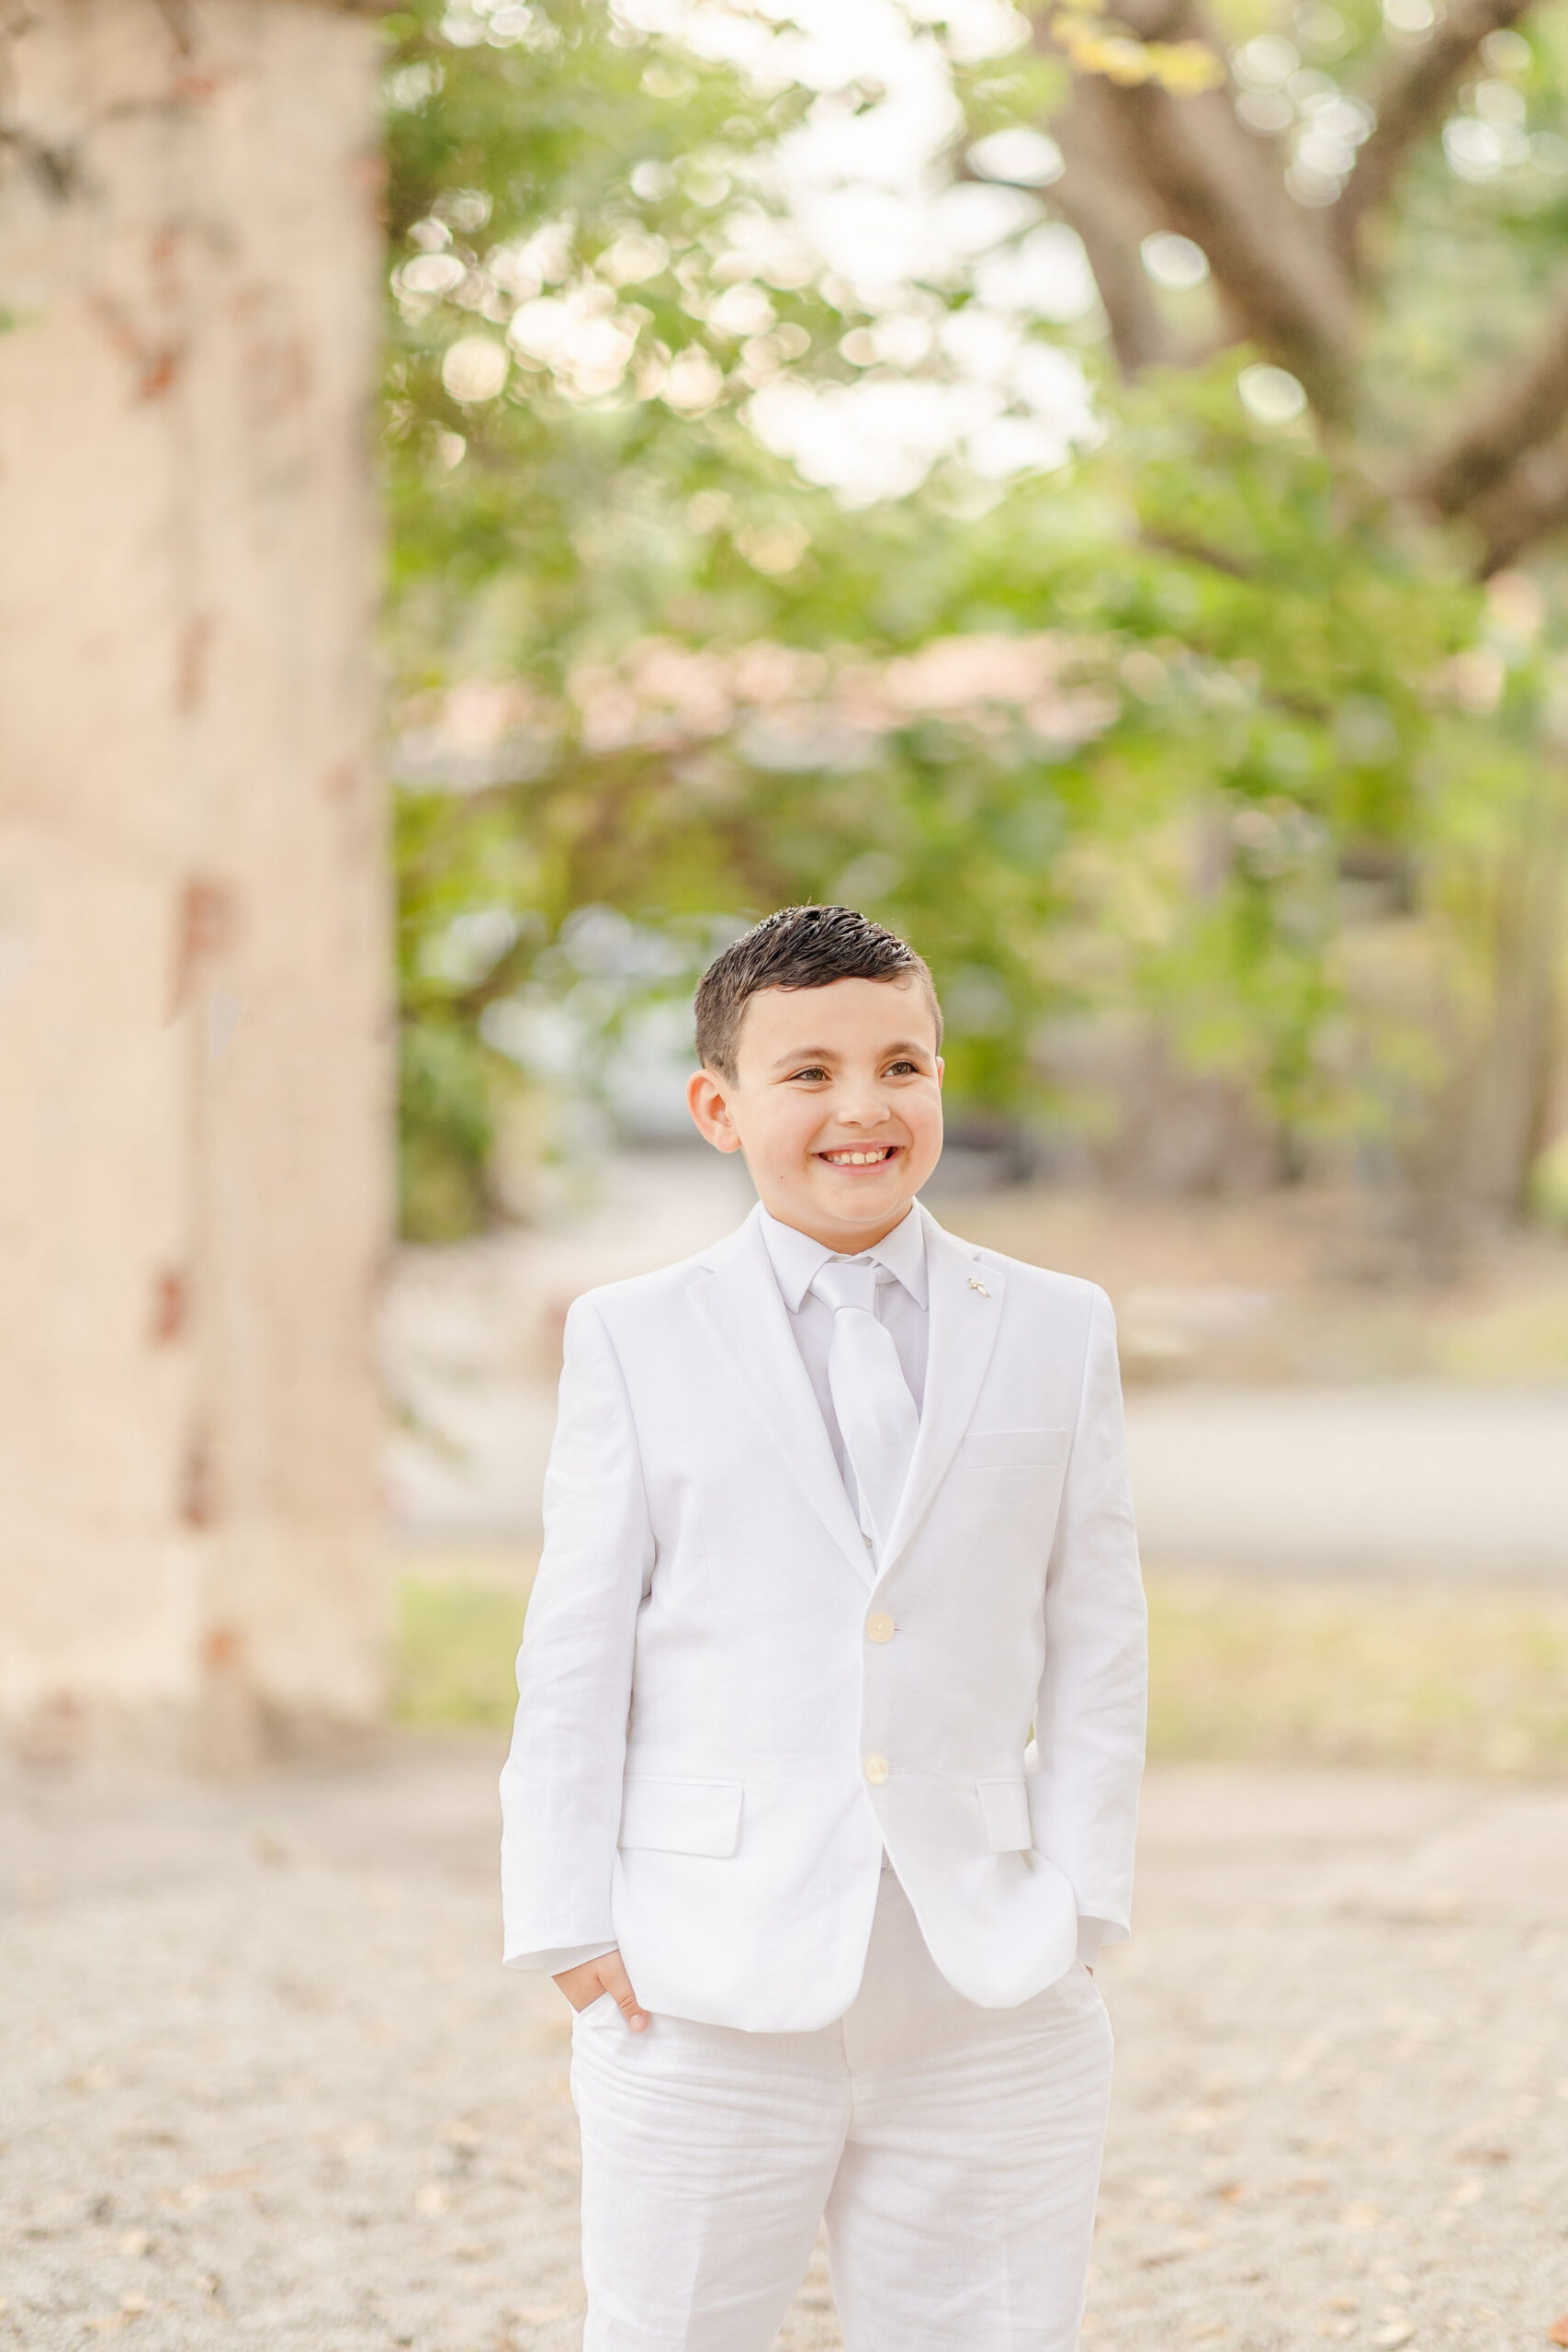 A young boy in a white suit stands with his hands in his pockets on a gravel path